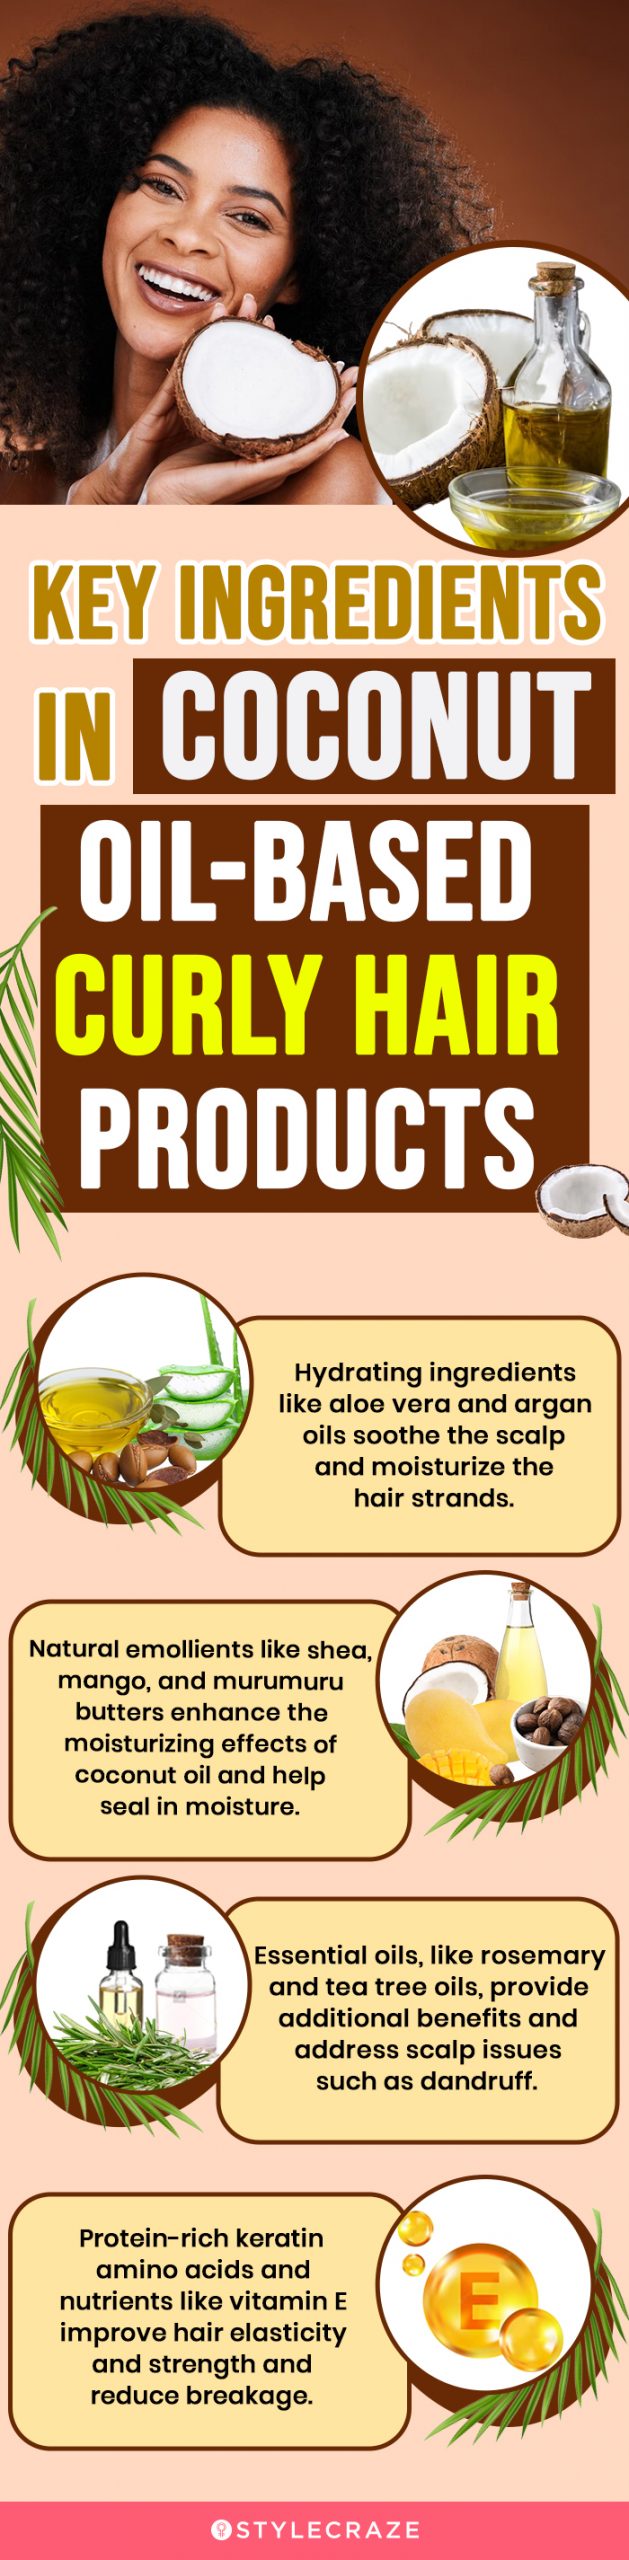 Key Ingredients In Coconut Oil-Based Curly Hair Products (infographic)